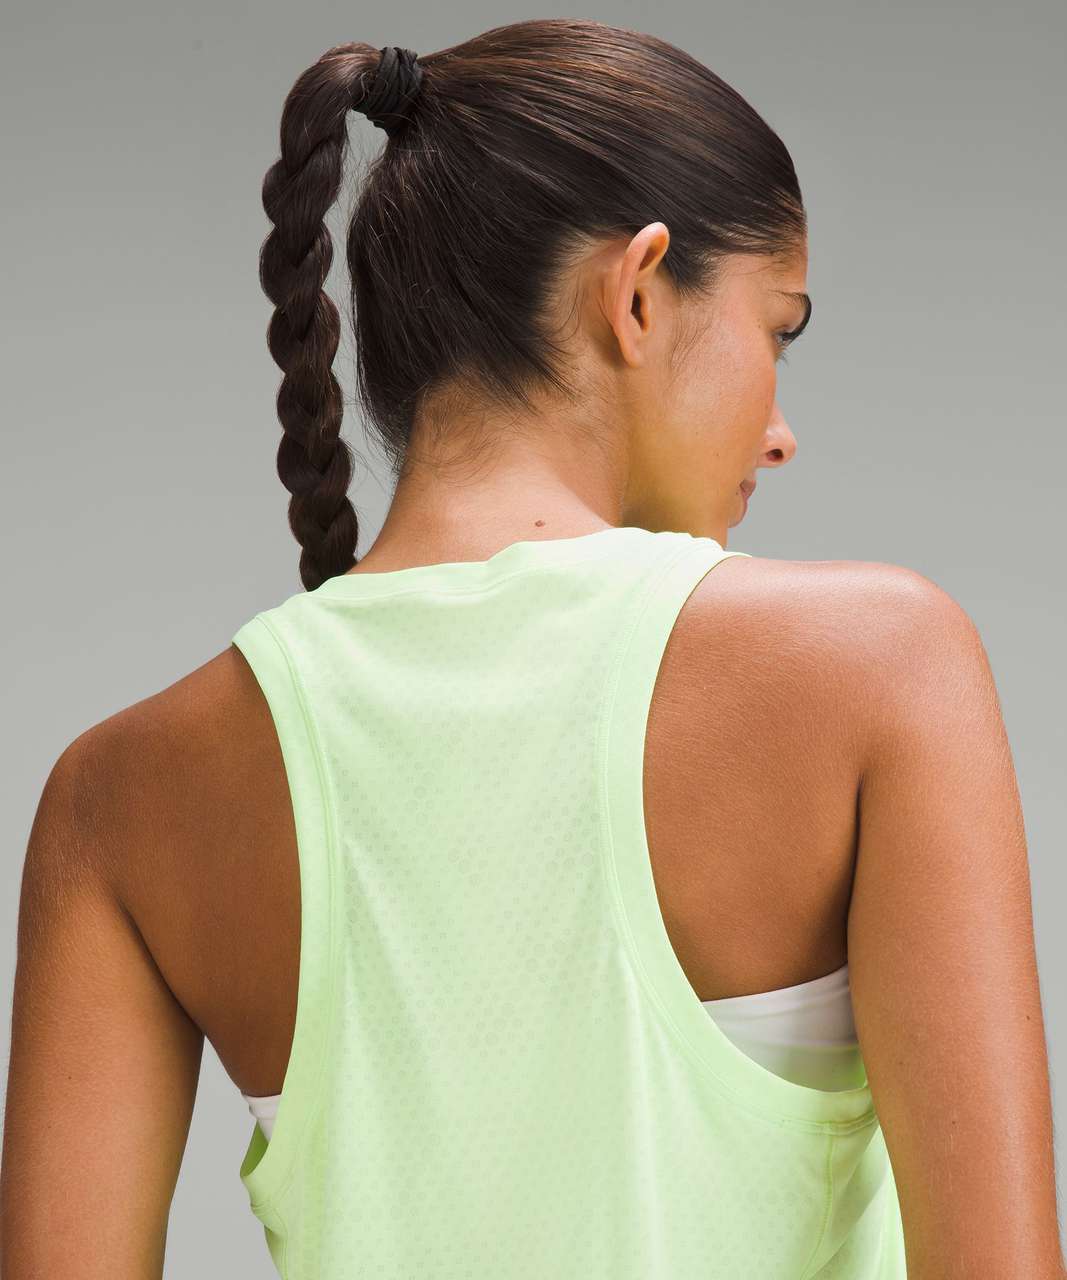 Lululemon Fast and Free Race Length Tank Top - Faded Zap